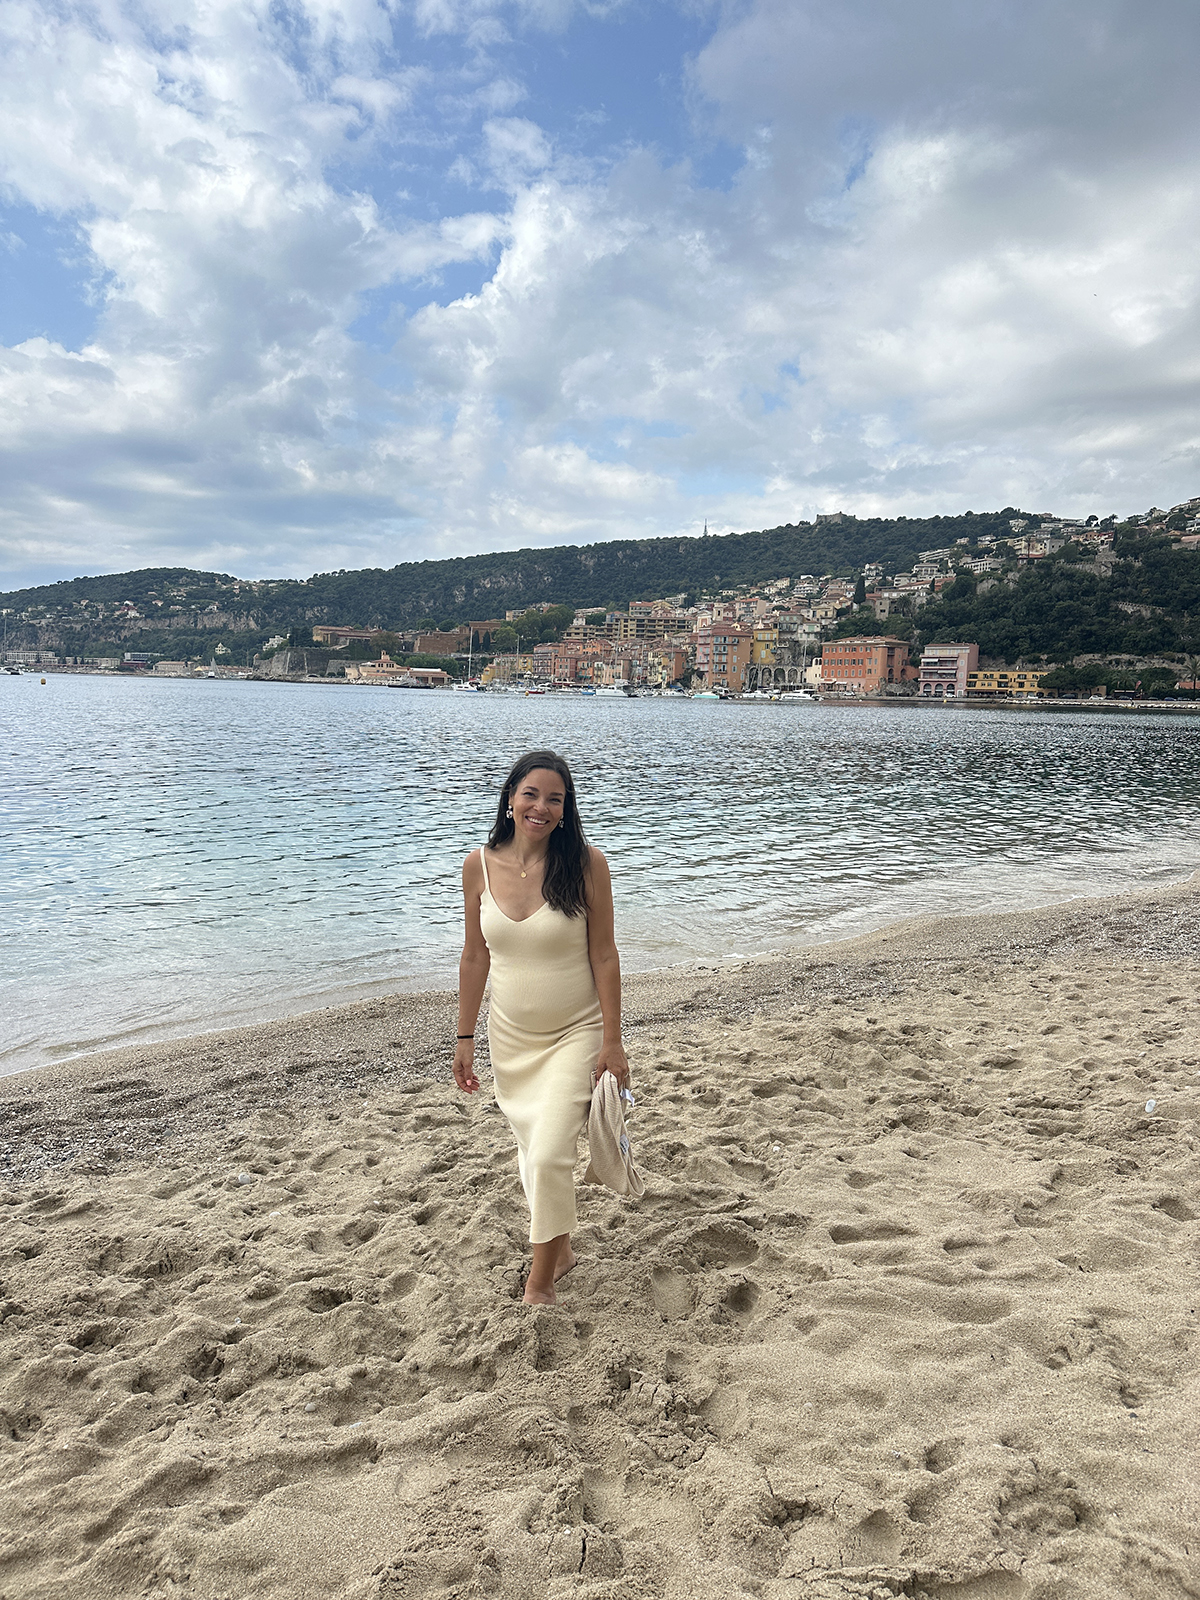 villefranche sur mer france - what to pack to europe